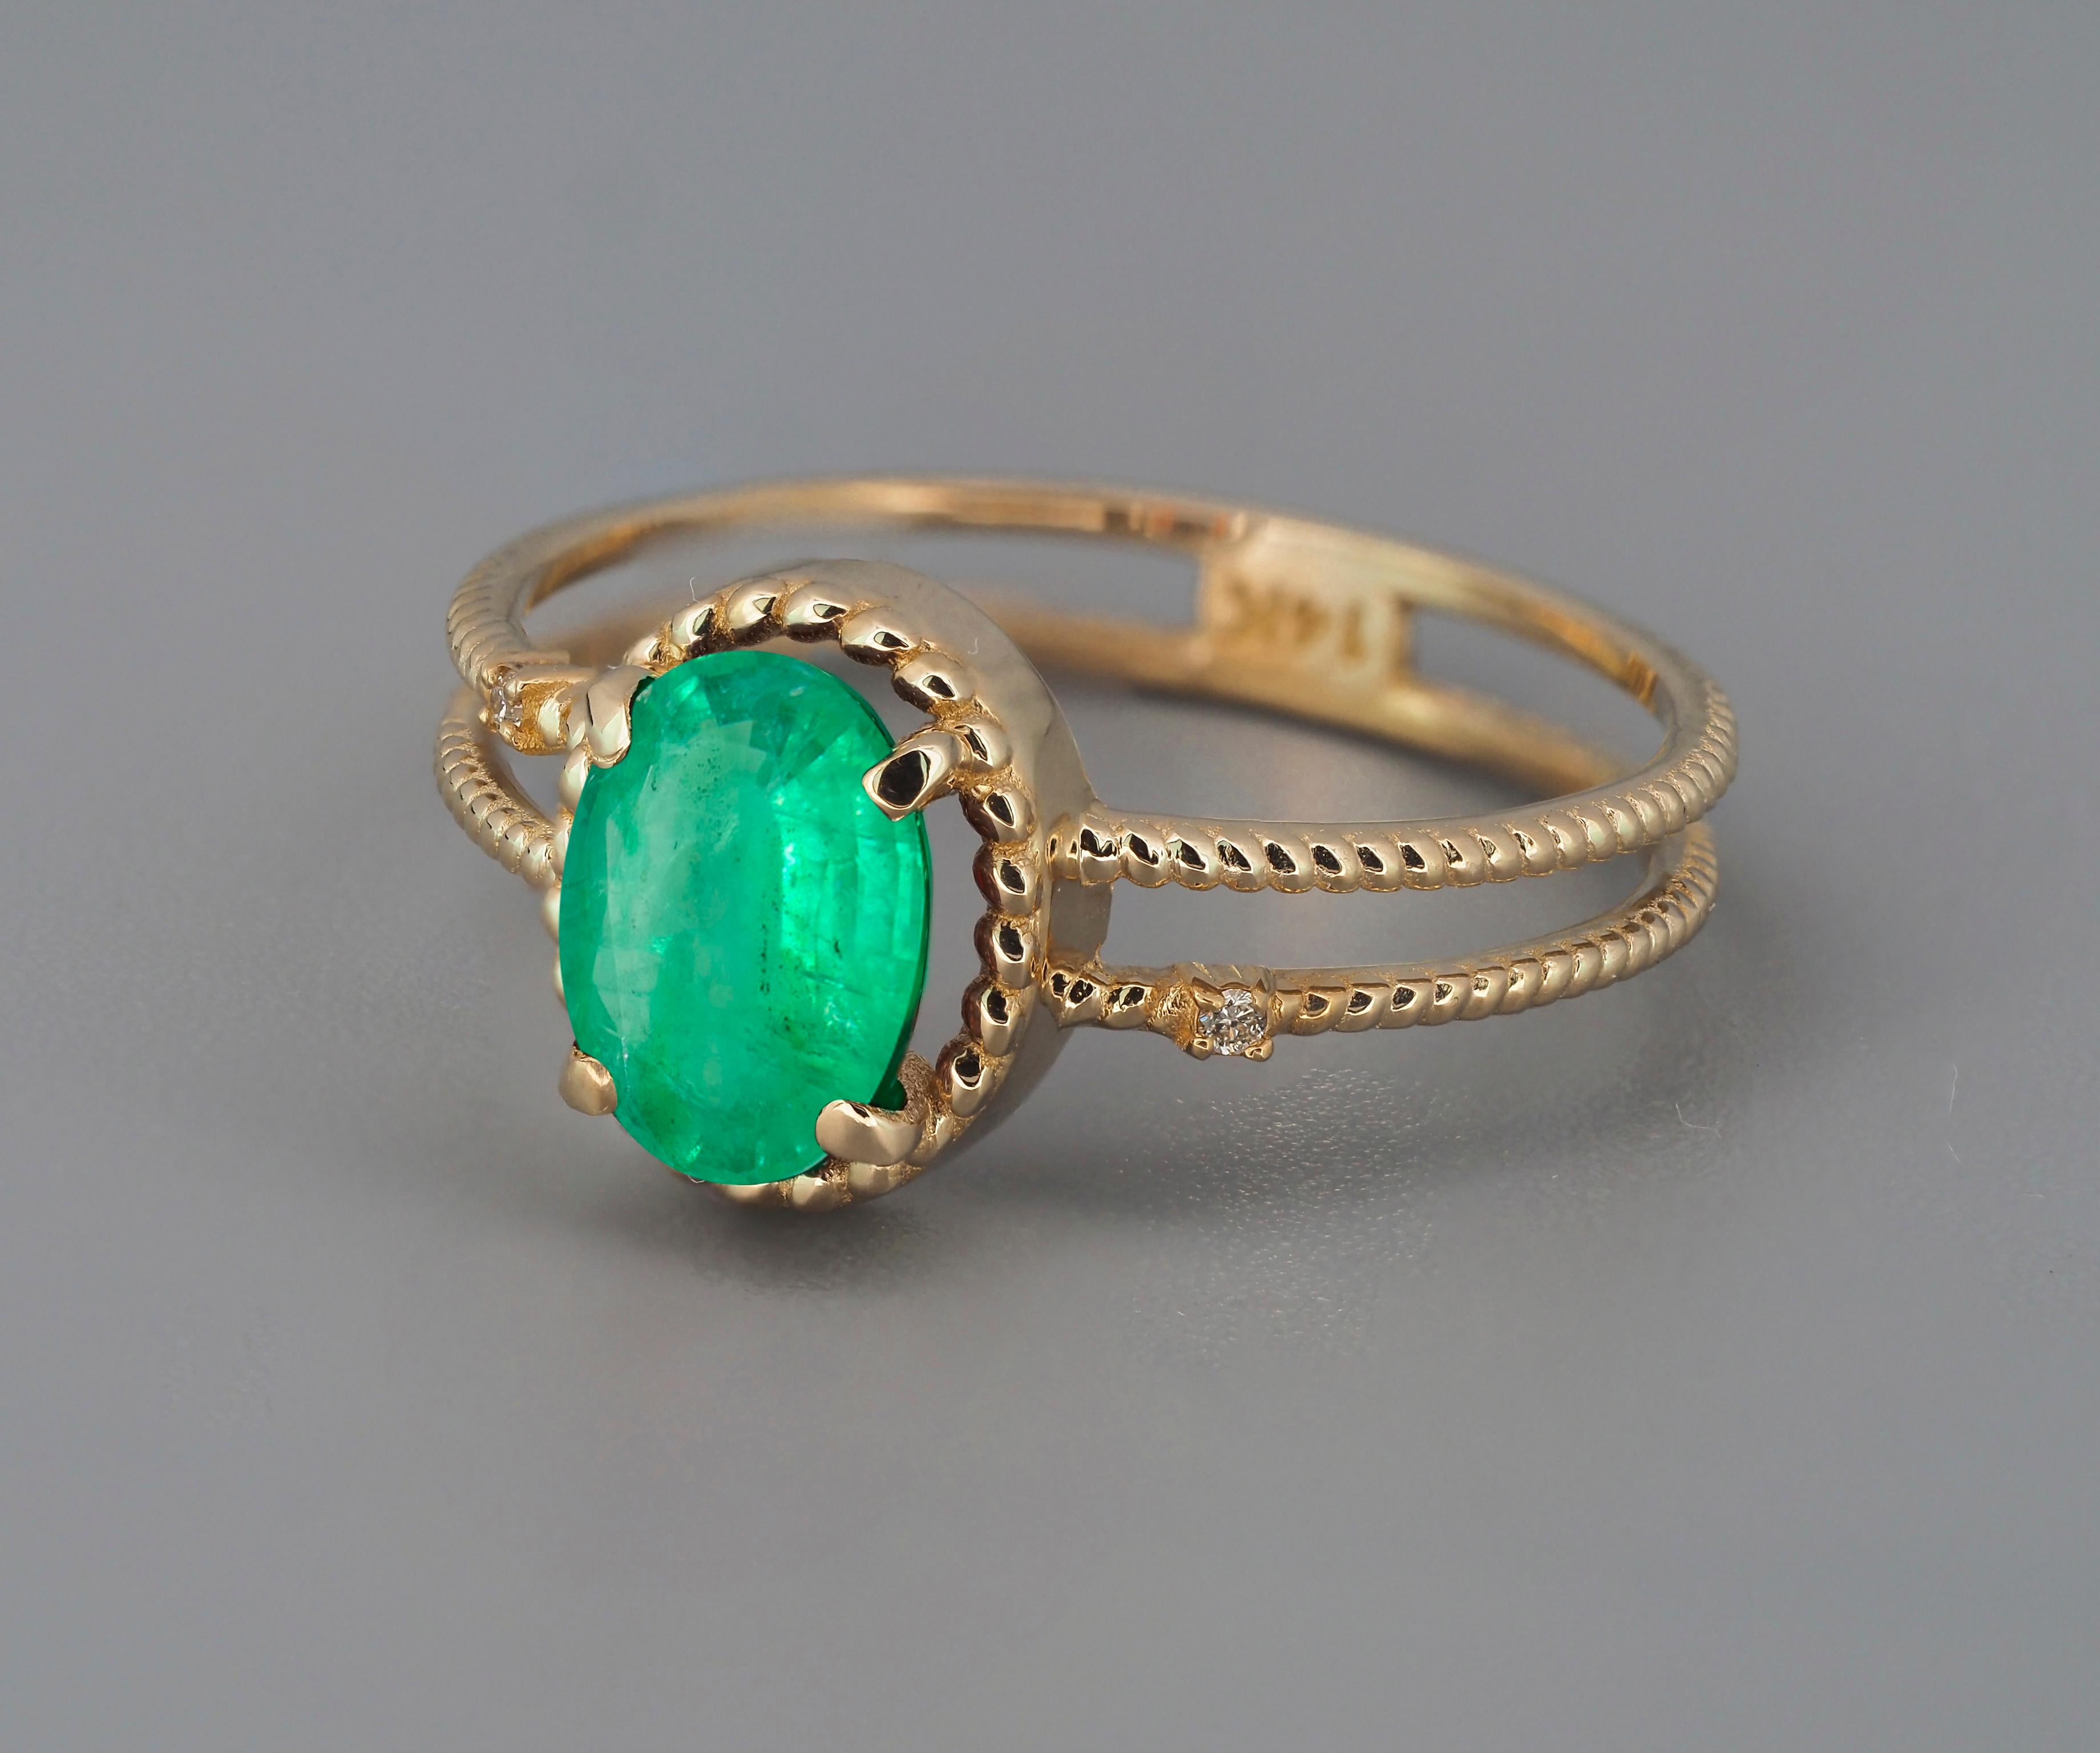 Oval Cut Emerald Gold Ring. Oval Emerald Ring. 14k Gold Ring with Emerald For Sale